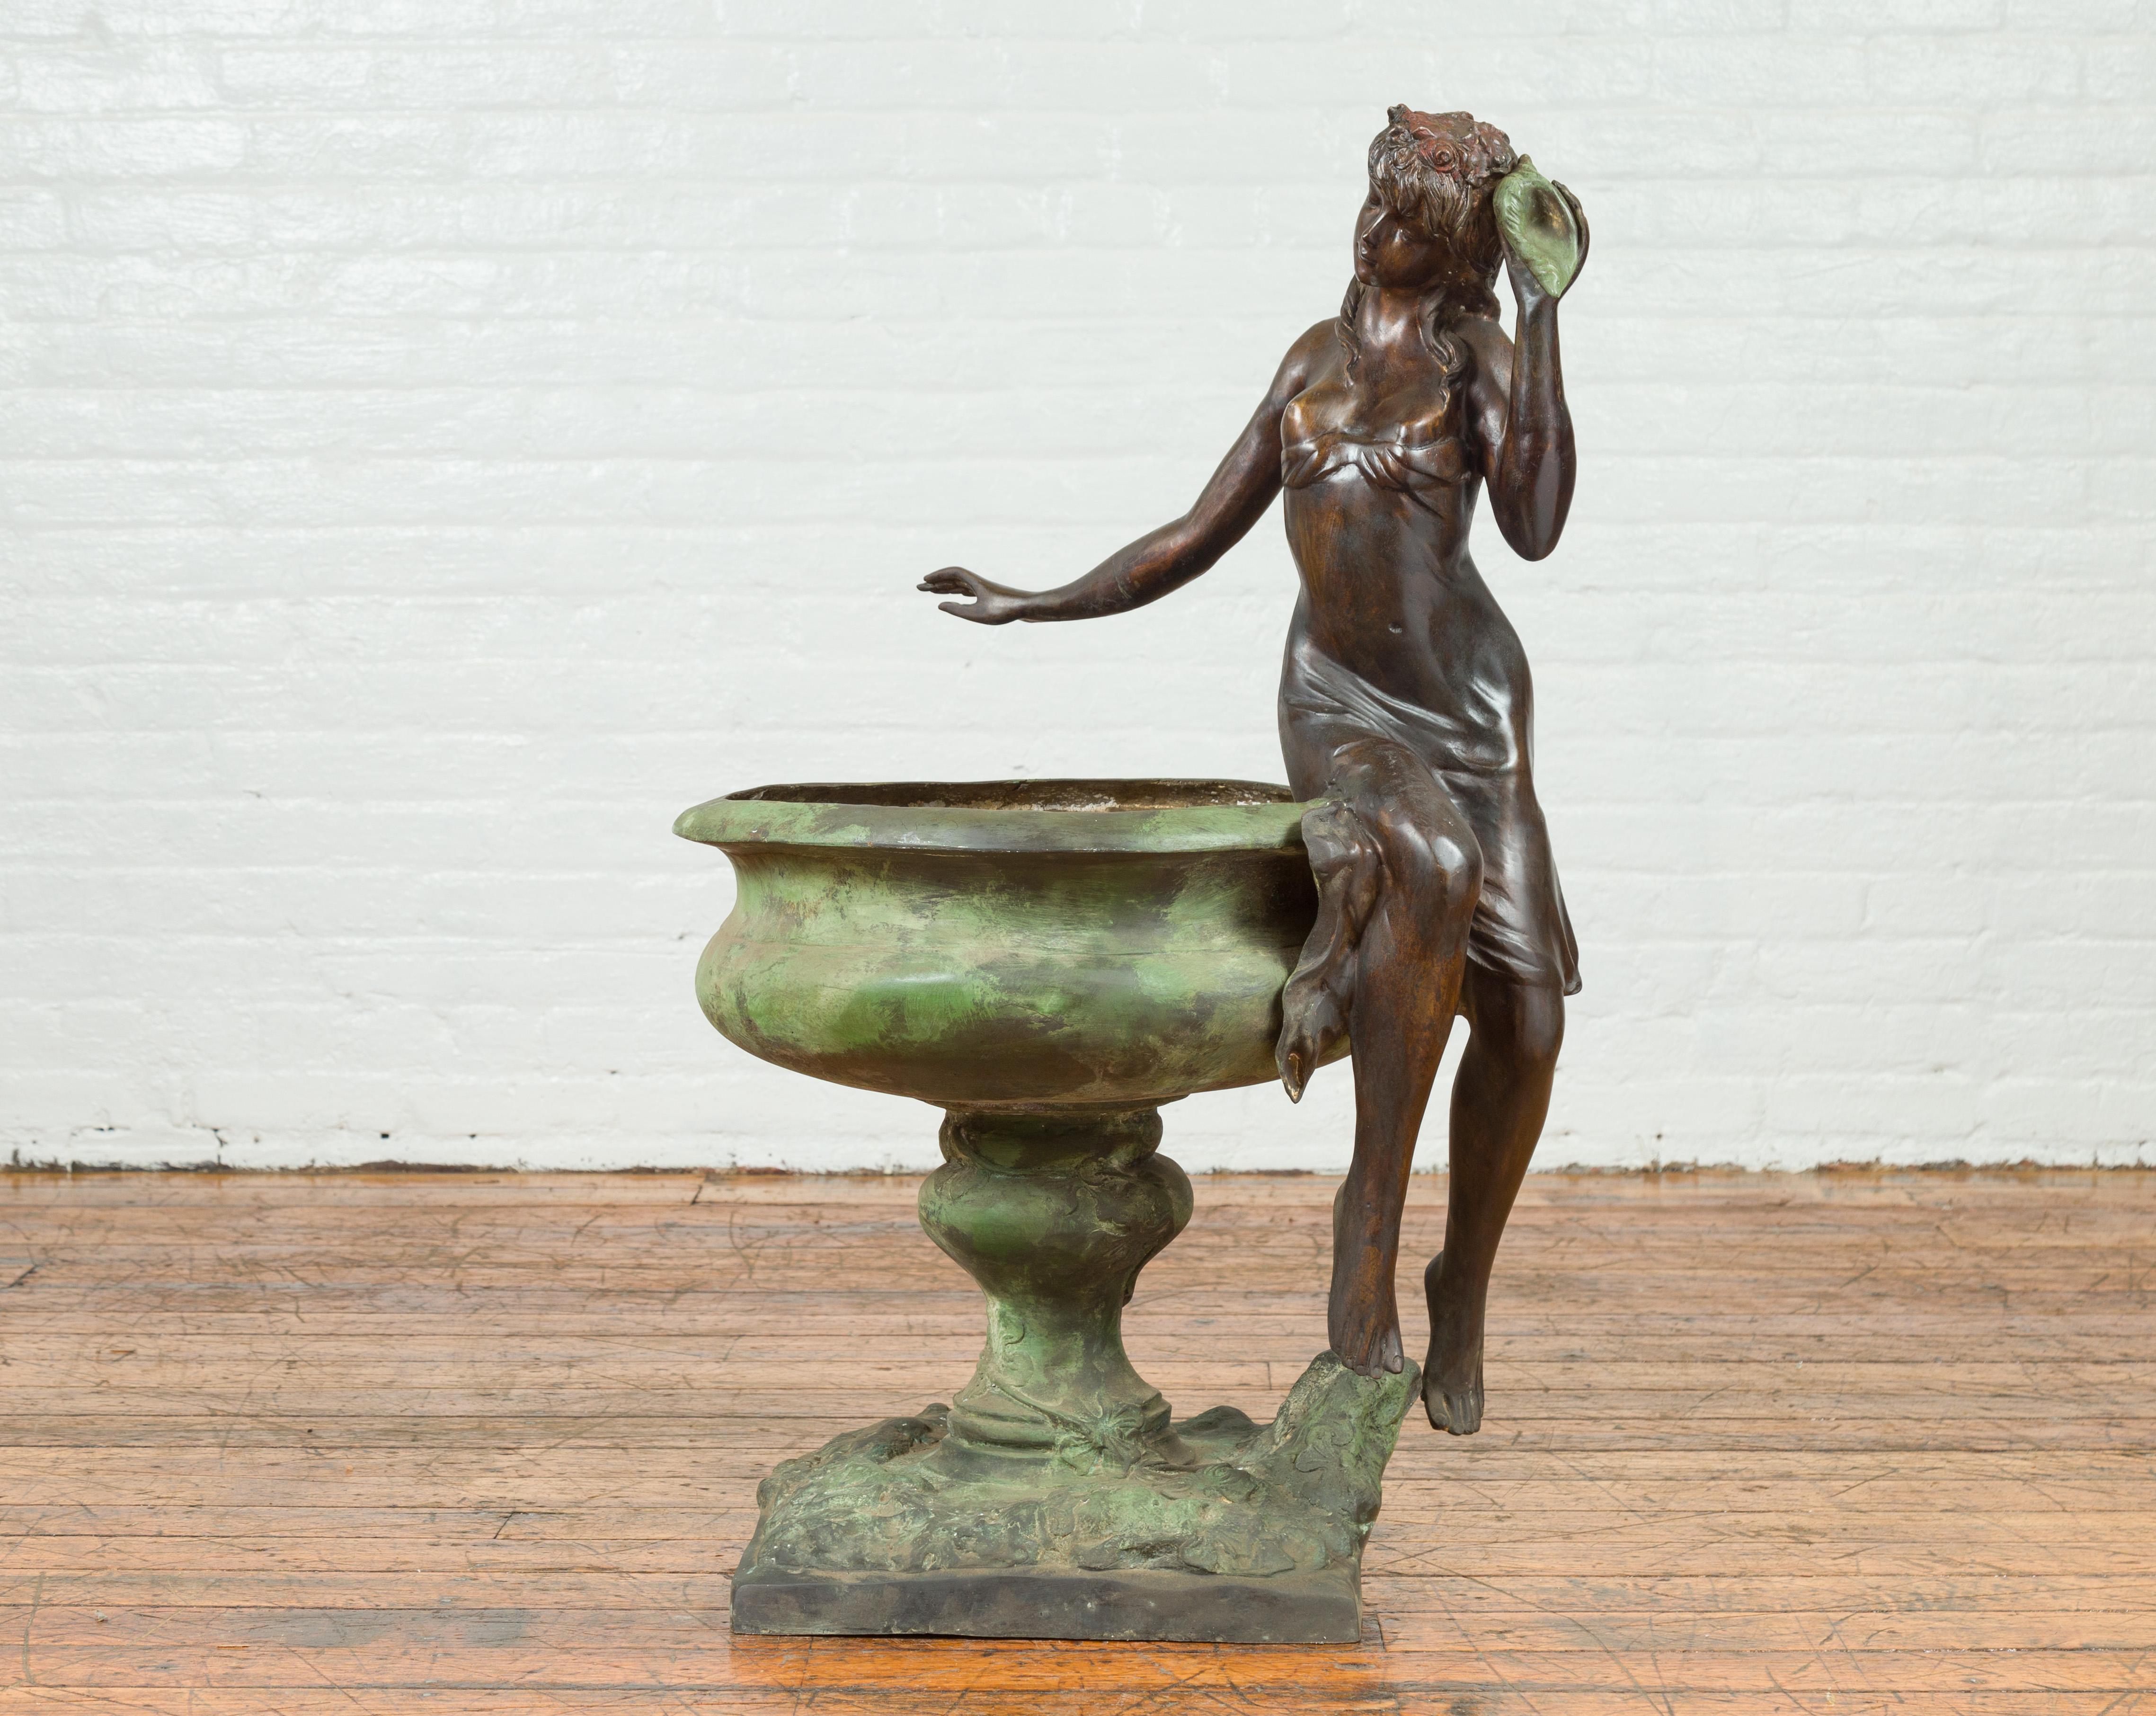 A vintage Verde bronze fountain from the mid-20th century, depicting a maiden holding a shell. Created with the traditional technique of the lost-wax (à la cire perdue) that allows a great precision in the details, this cast bronze fountain features